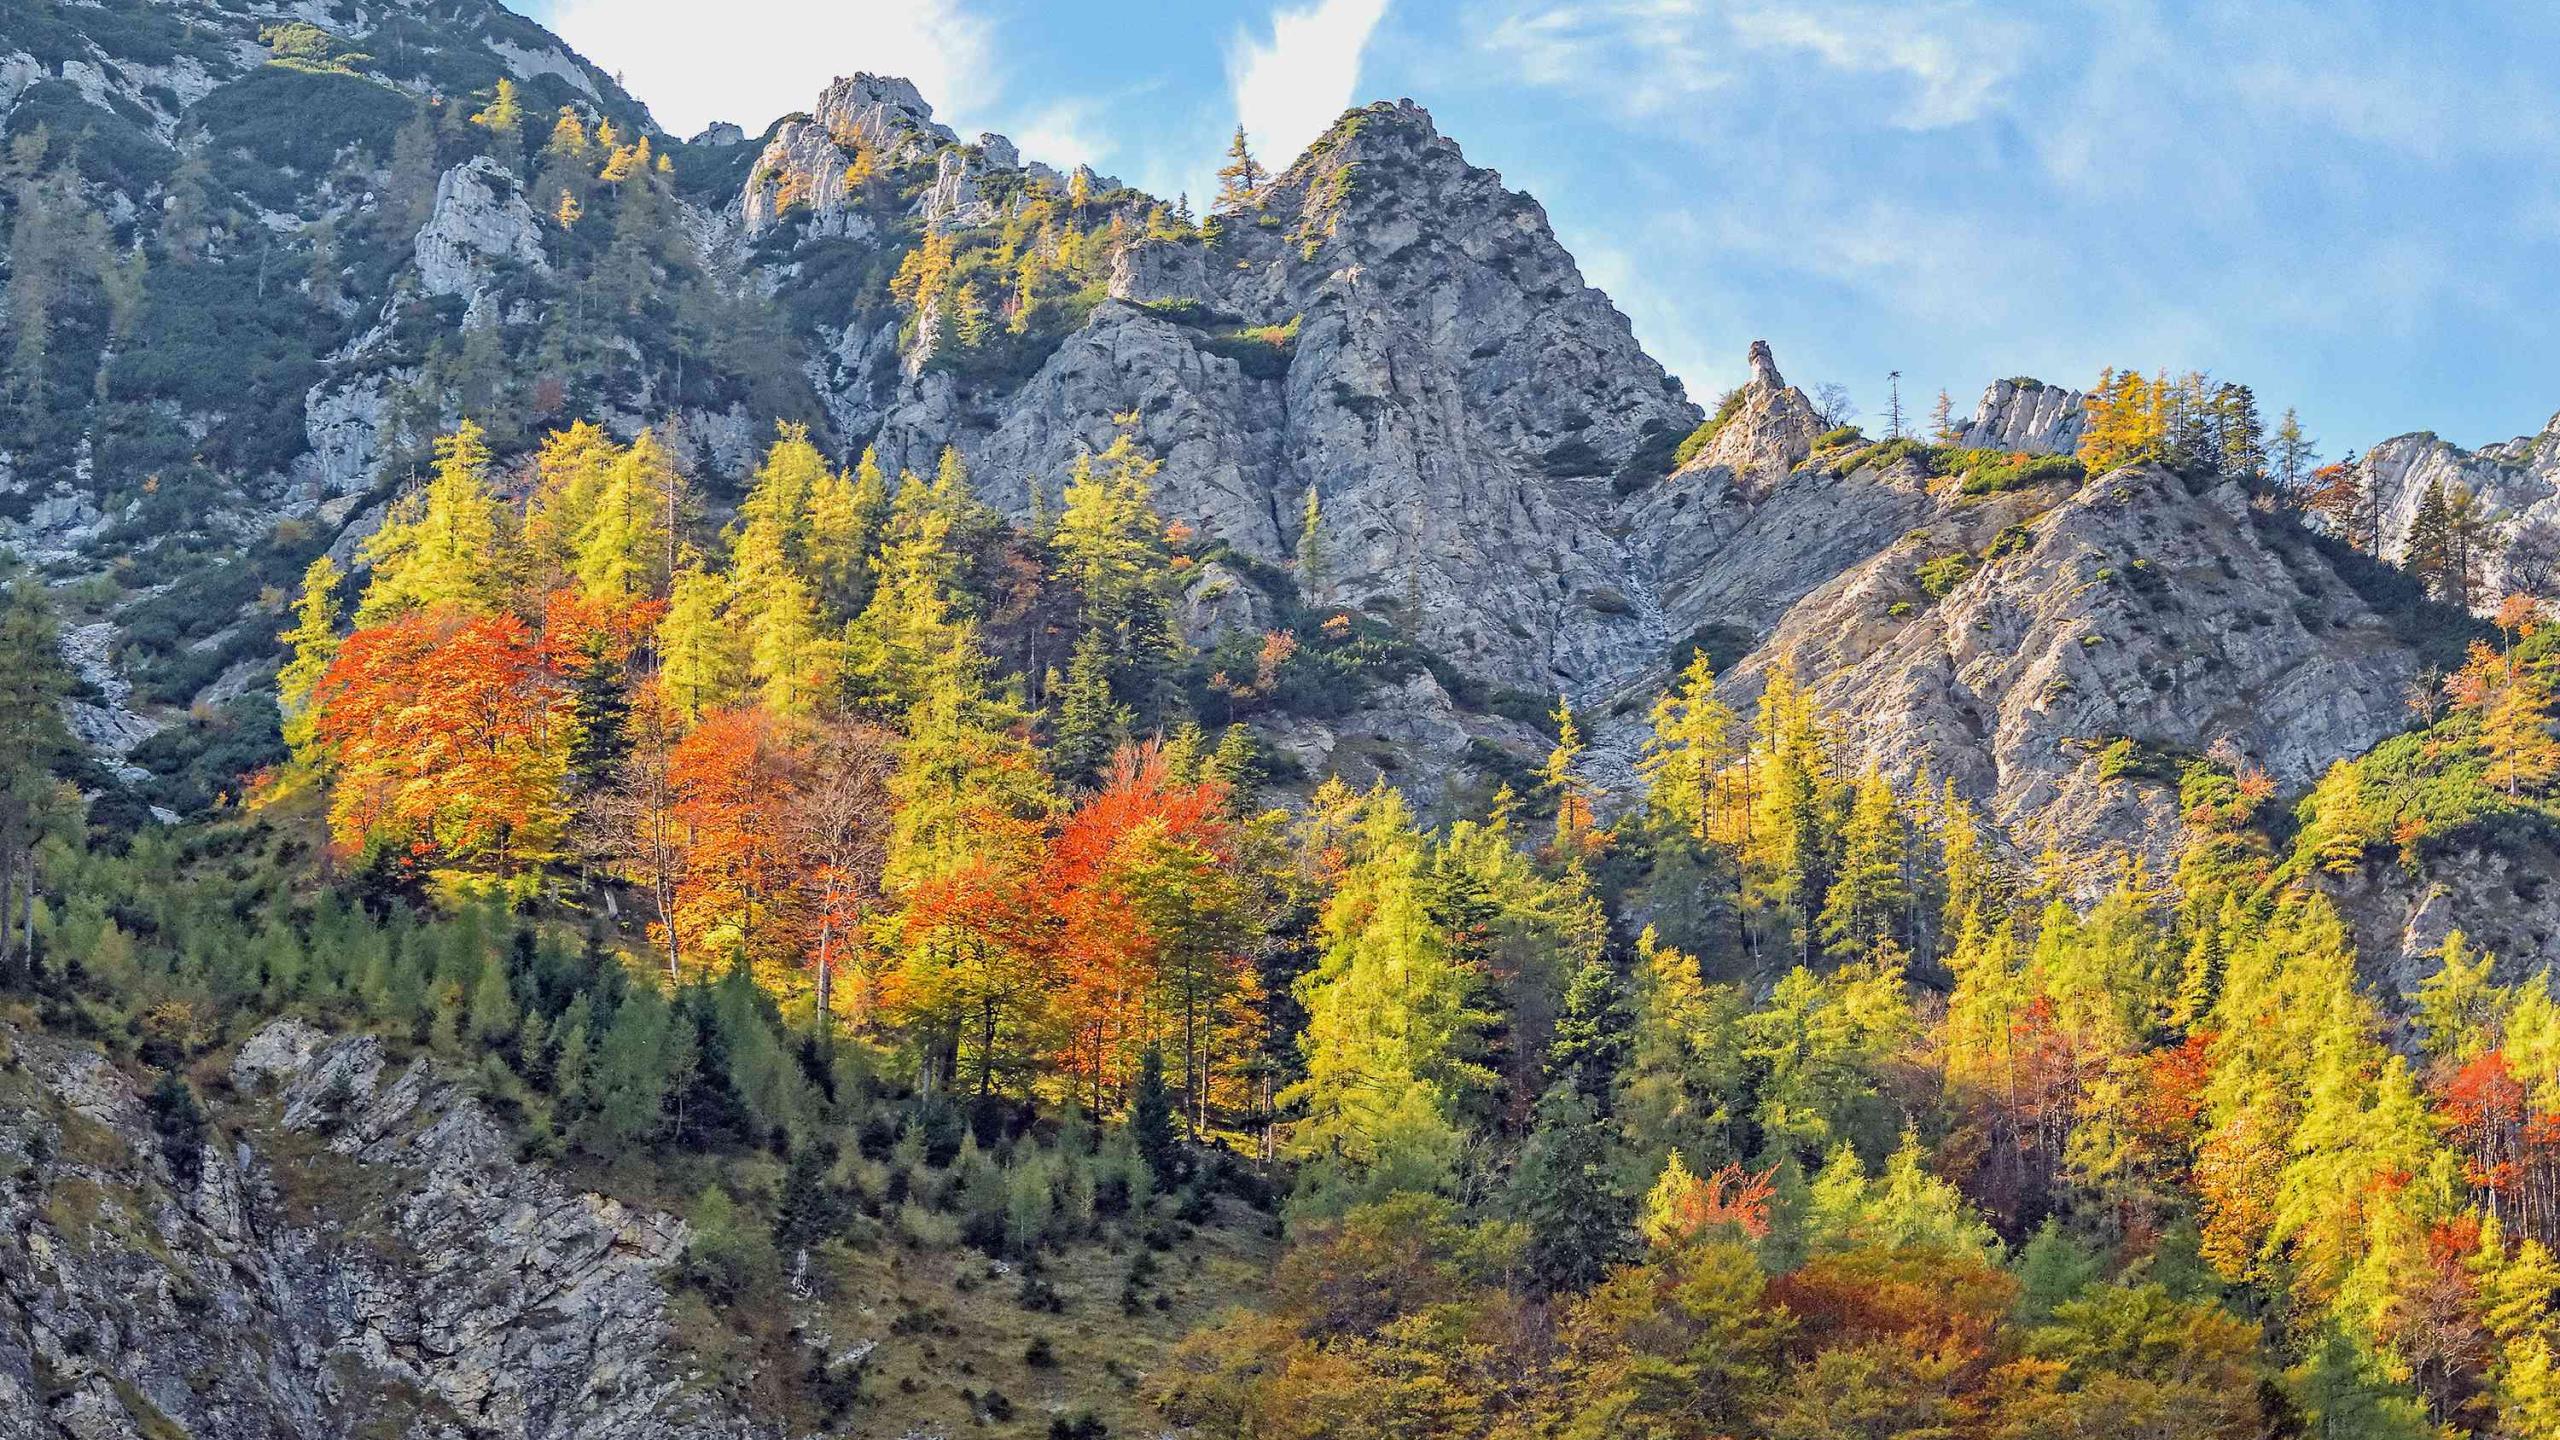 Autumn-colored beech-larch forest grows island-like in the middle of steep rocky terrain